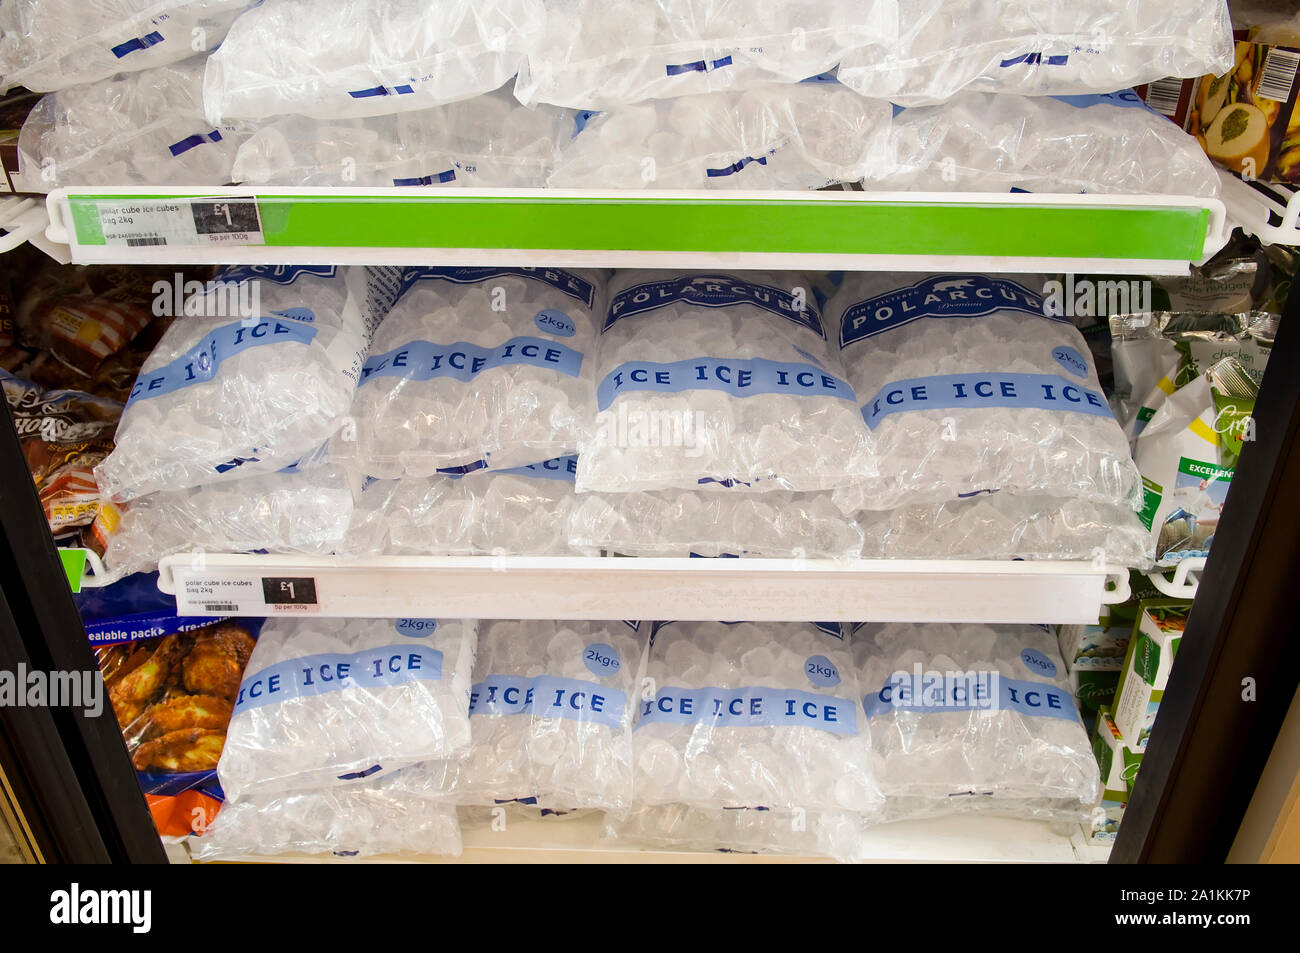 Packets of ice for sale in a large industrial freezer. Stock Photo